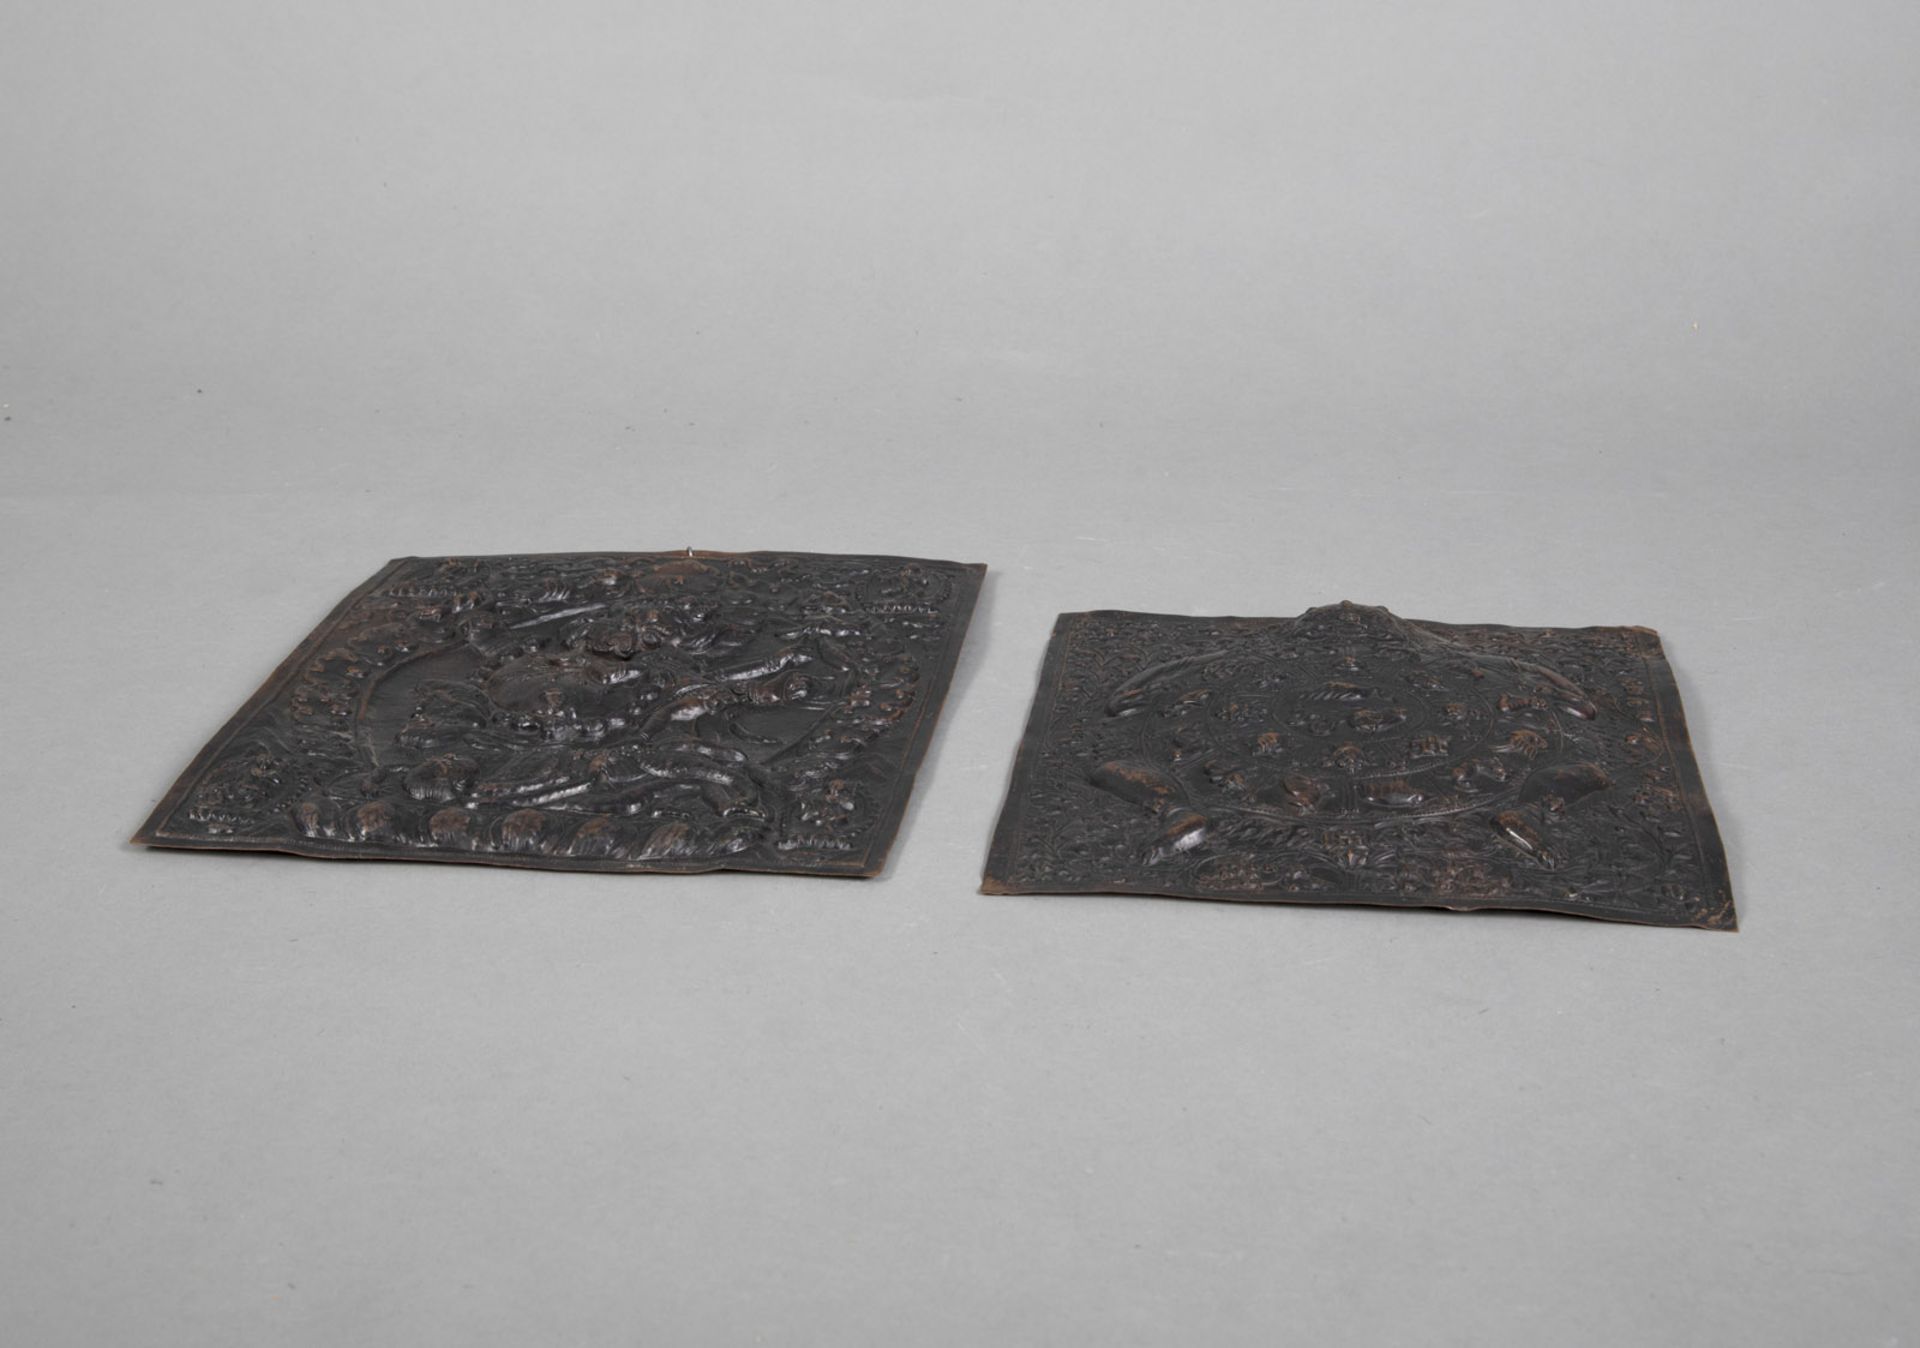 TWO EMBOSSED COPPER RECTANGULAR PLAQUES DEPICTING YAMA AND THE WHEEL OF LIFE - Image 2 of 3